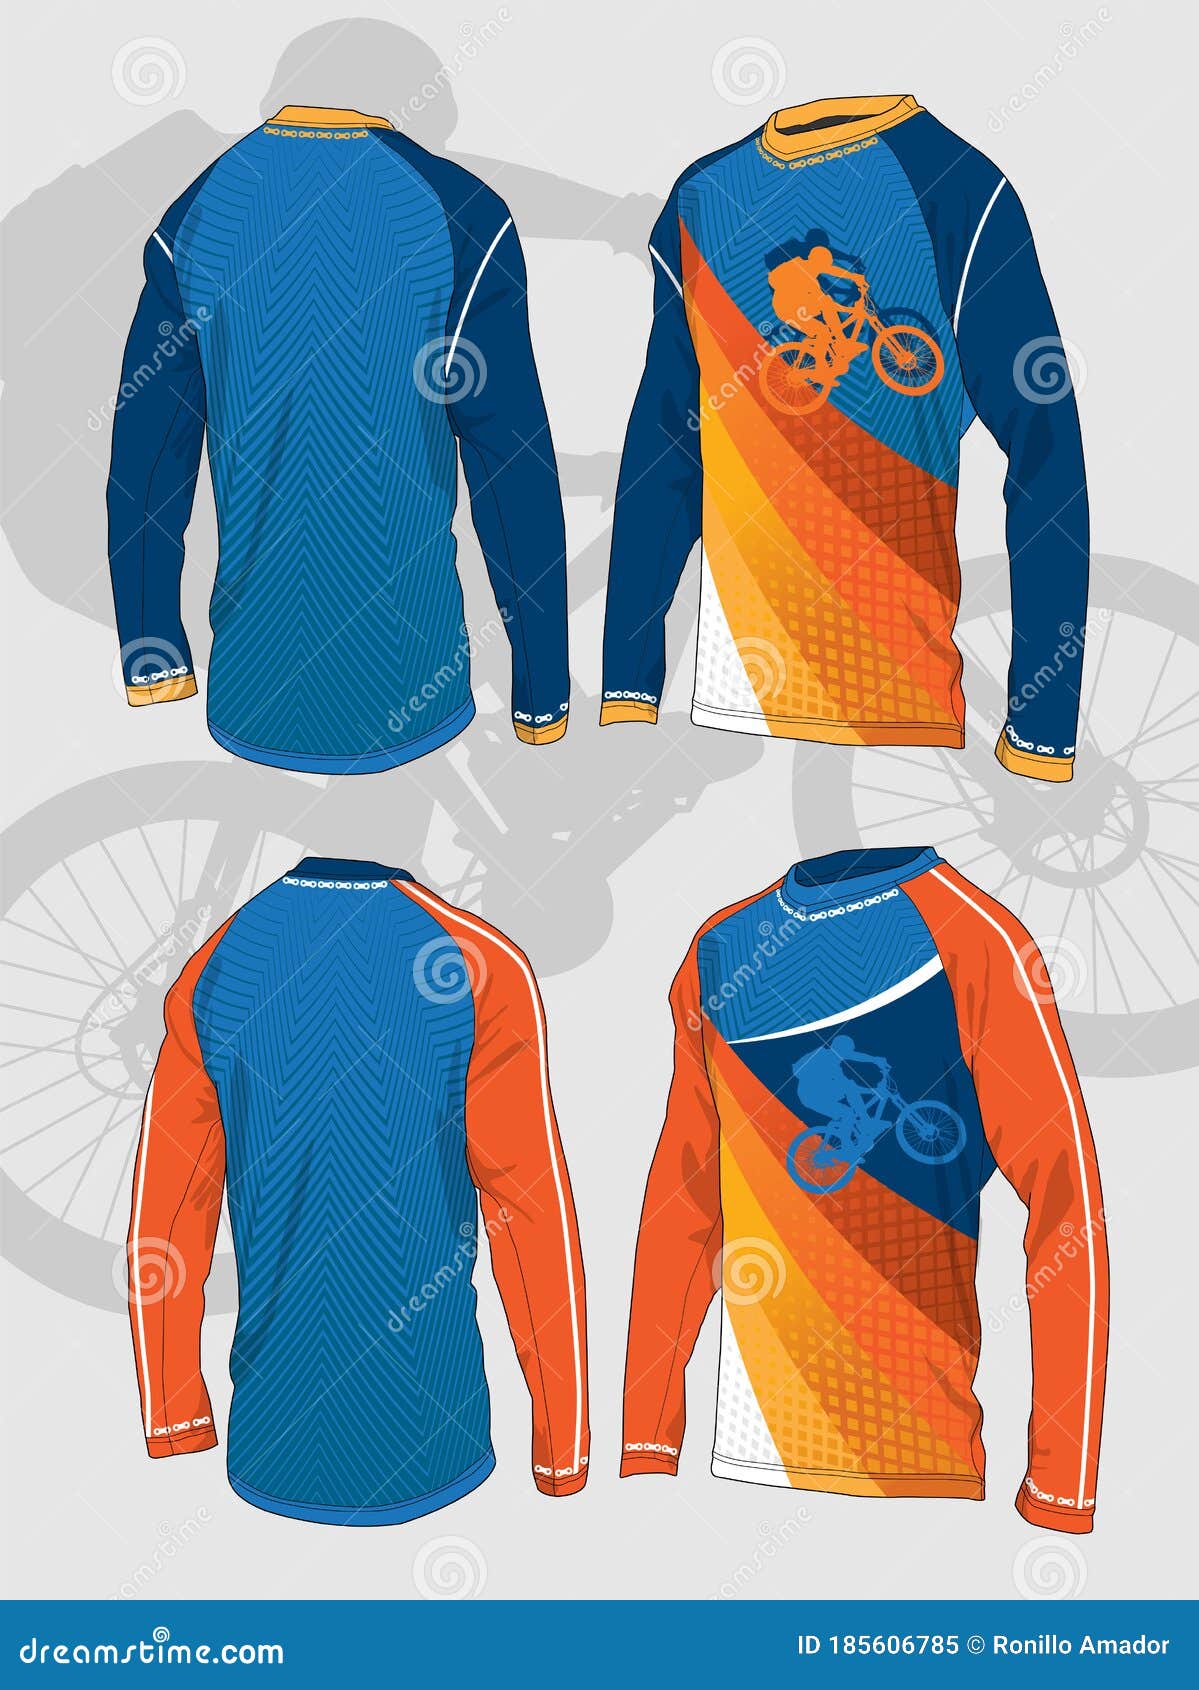 Mountain Bike Long Sleeve Jersey Vector Template Stock Vector Illustration Of Bike Extreme 185606785